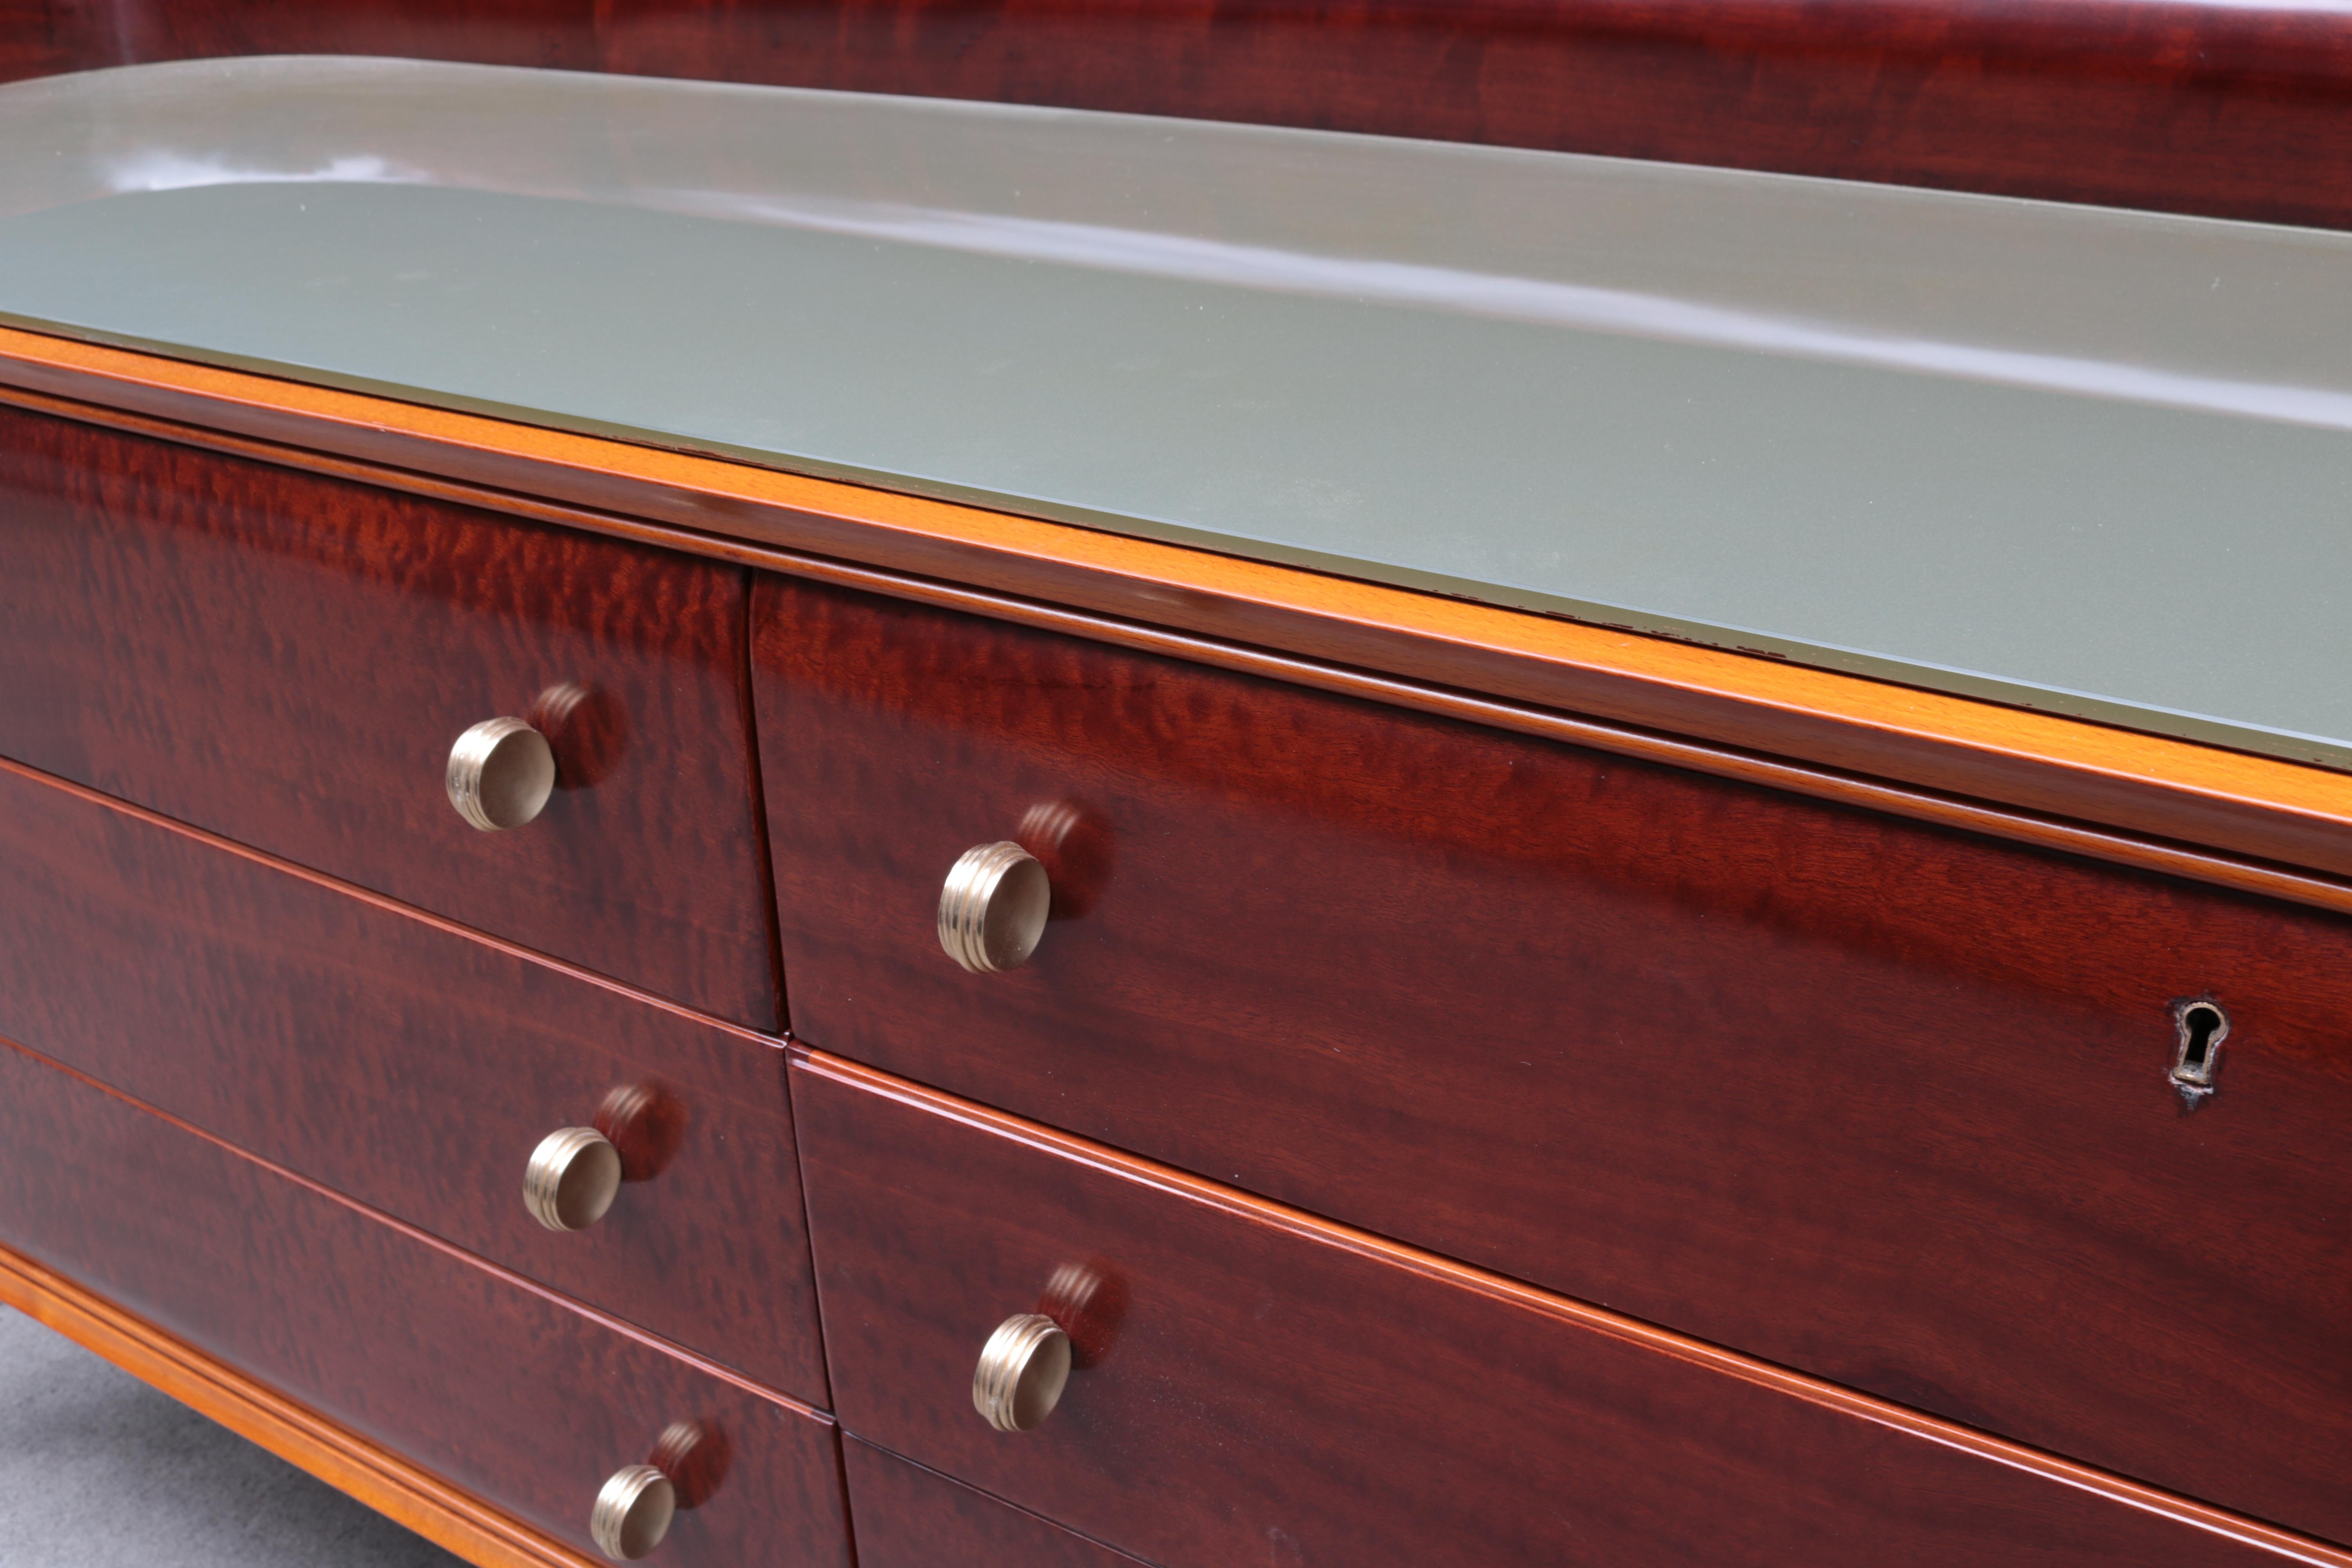 A fine Italian six-drawer commode.
Mahogany with pearwood trim, fruitwood inlays,
patinated brass pulls and sabots and glass top.
 